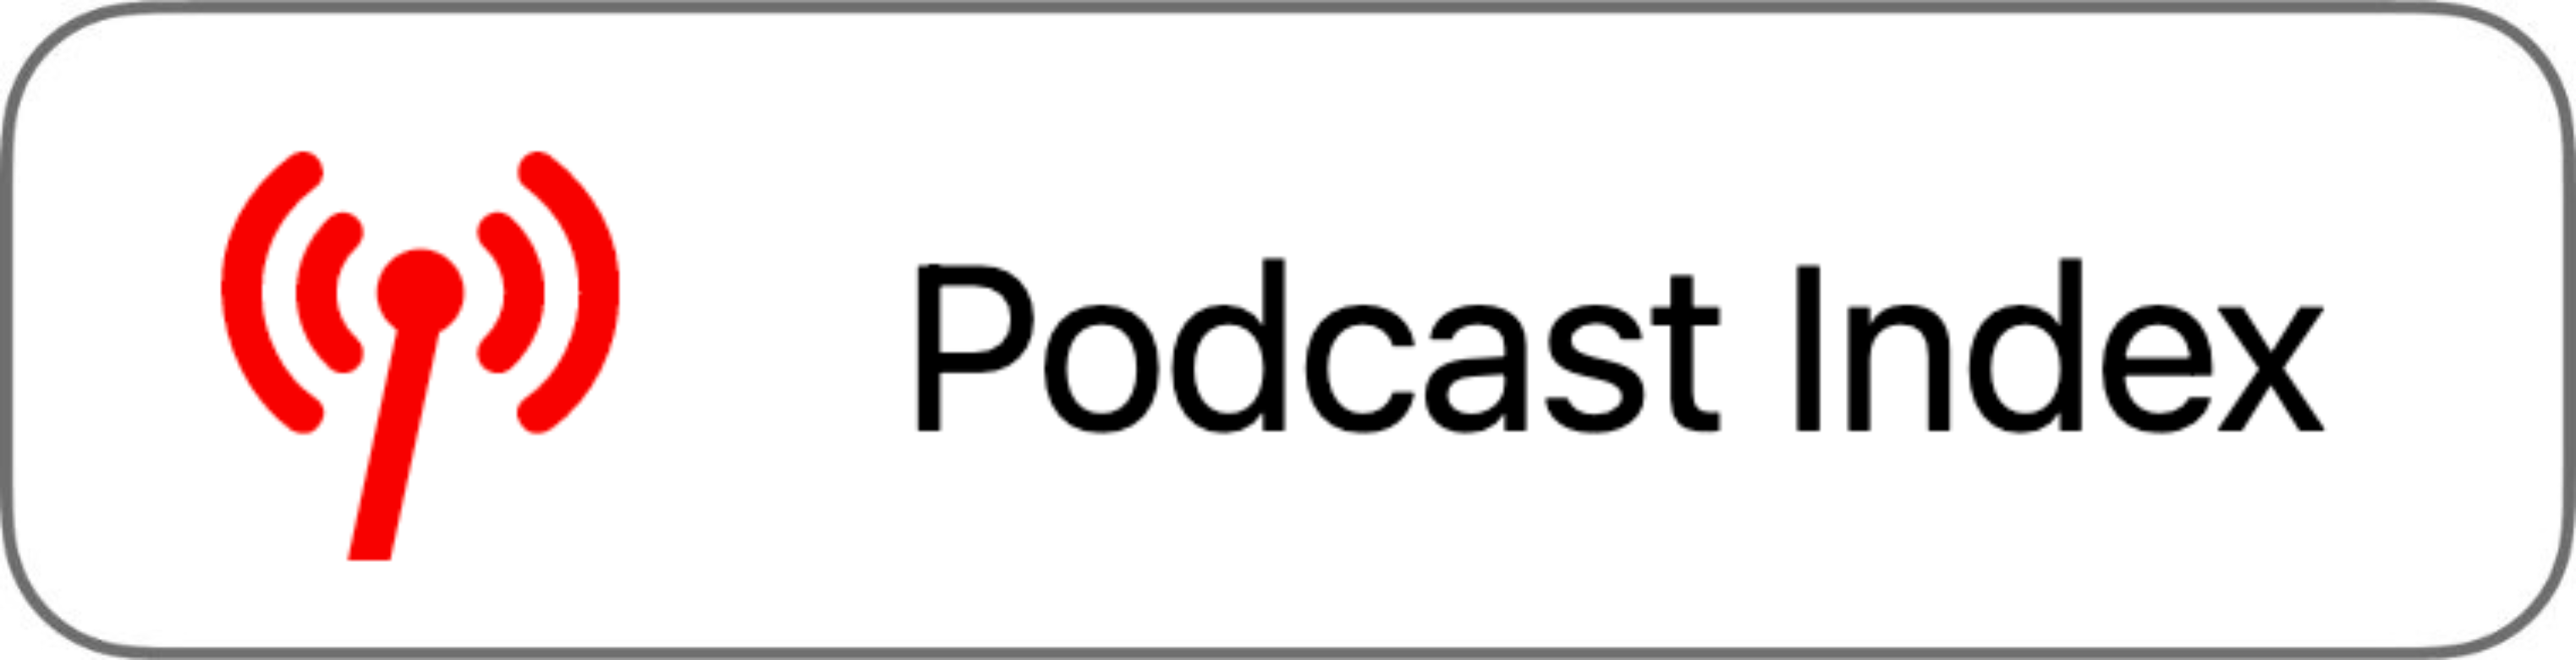 Podcast Index - The Employee Advocacy & Influence Podcast by DSMN8